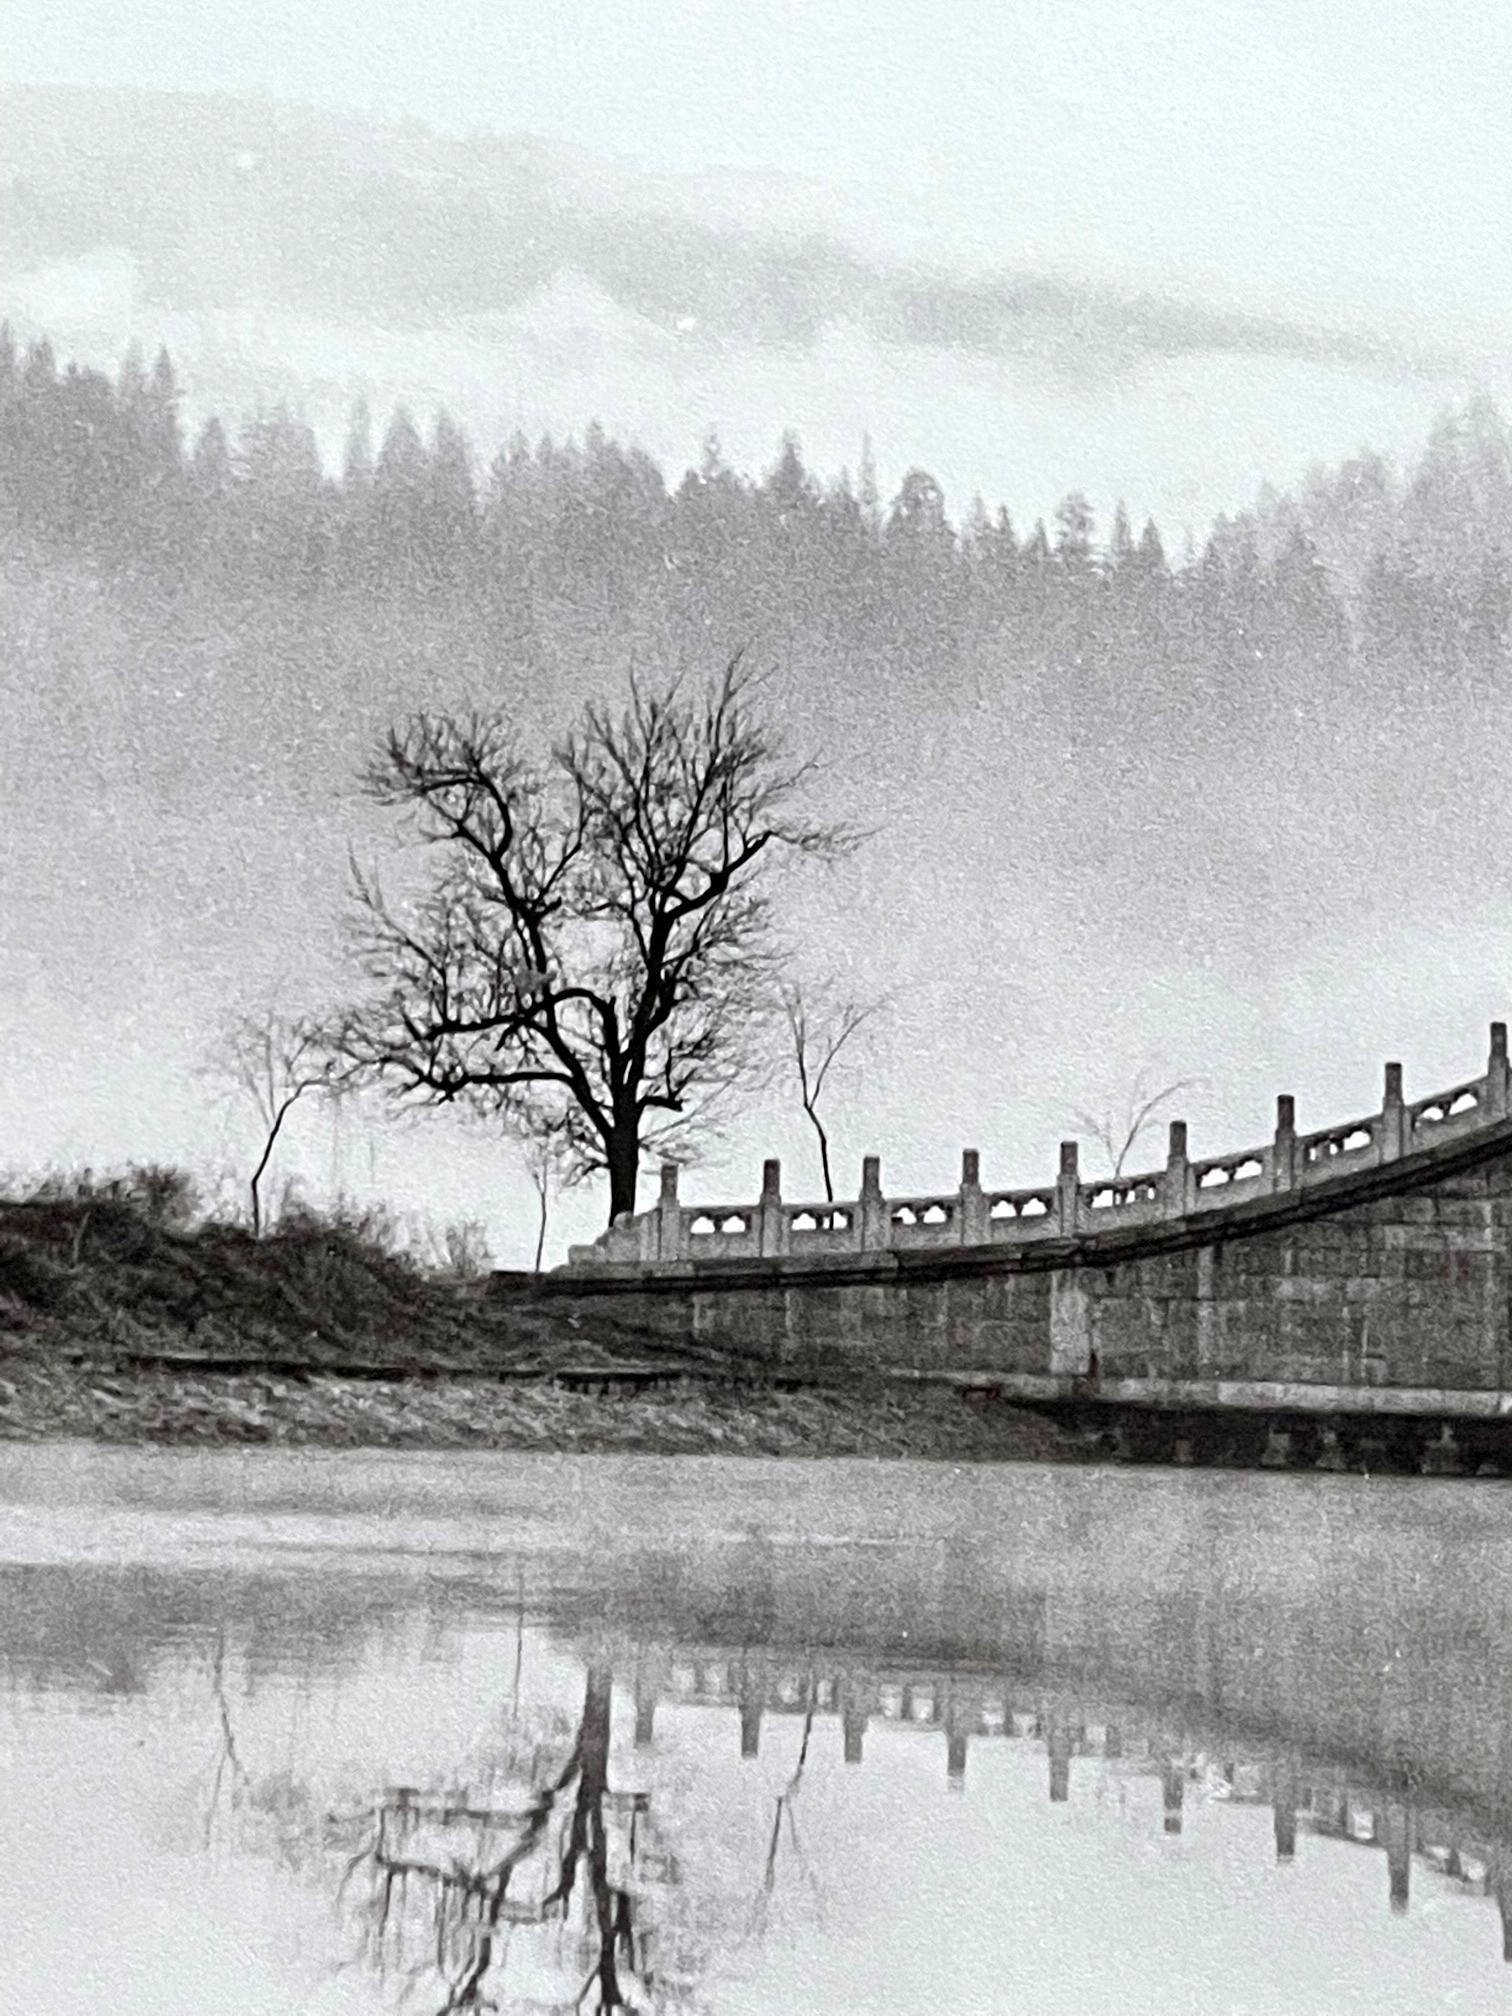 Late 20th Century Framed Photograph by Don Hong-Oai For Sale